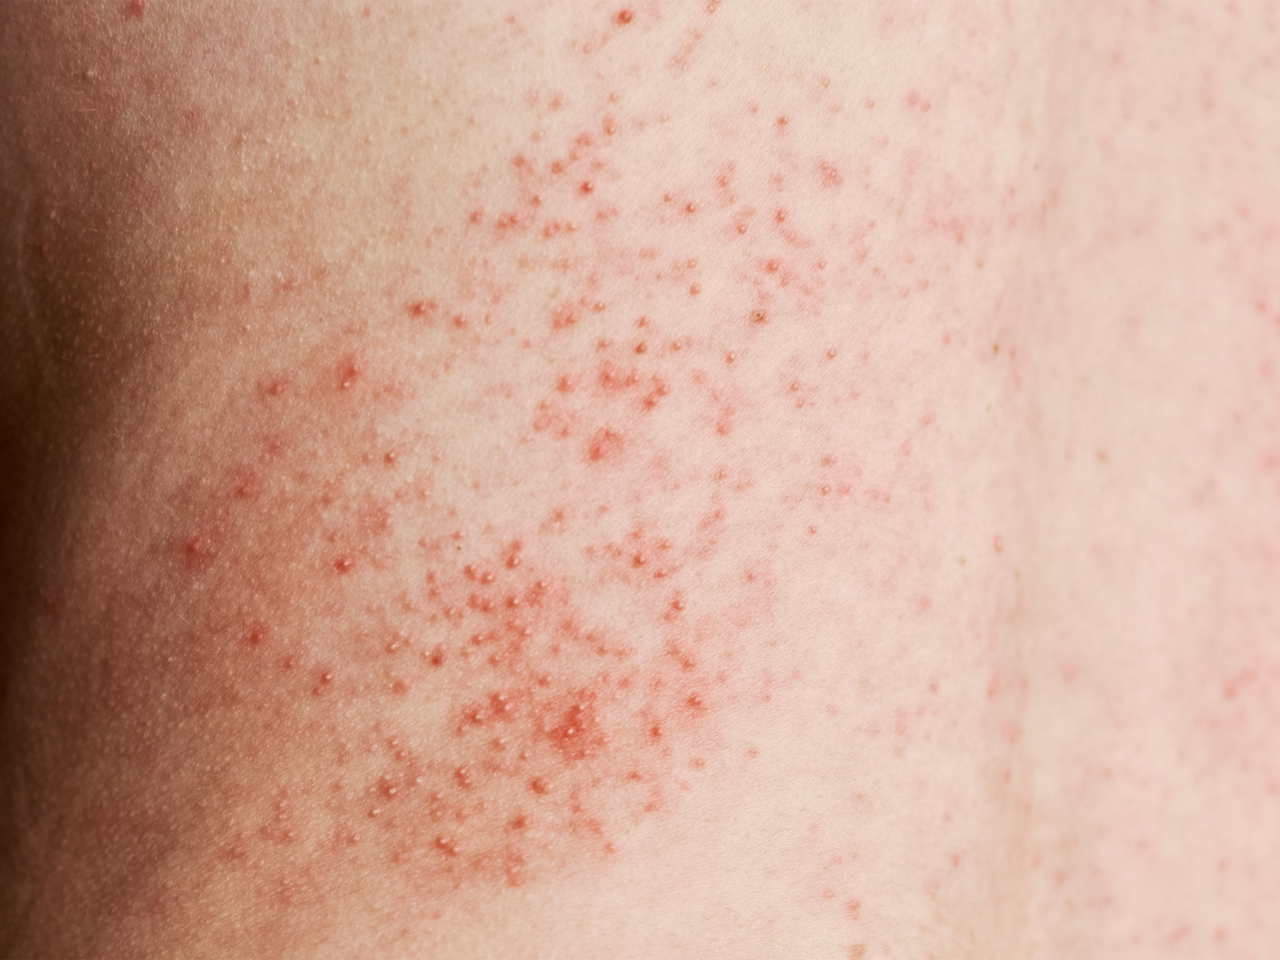 Skin with red rashes and eczema